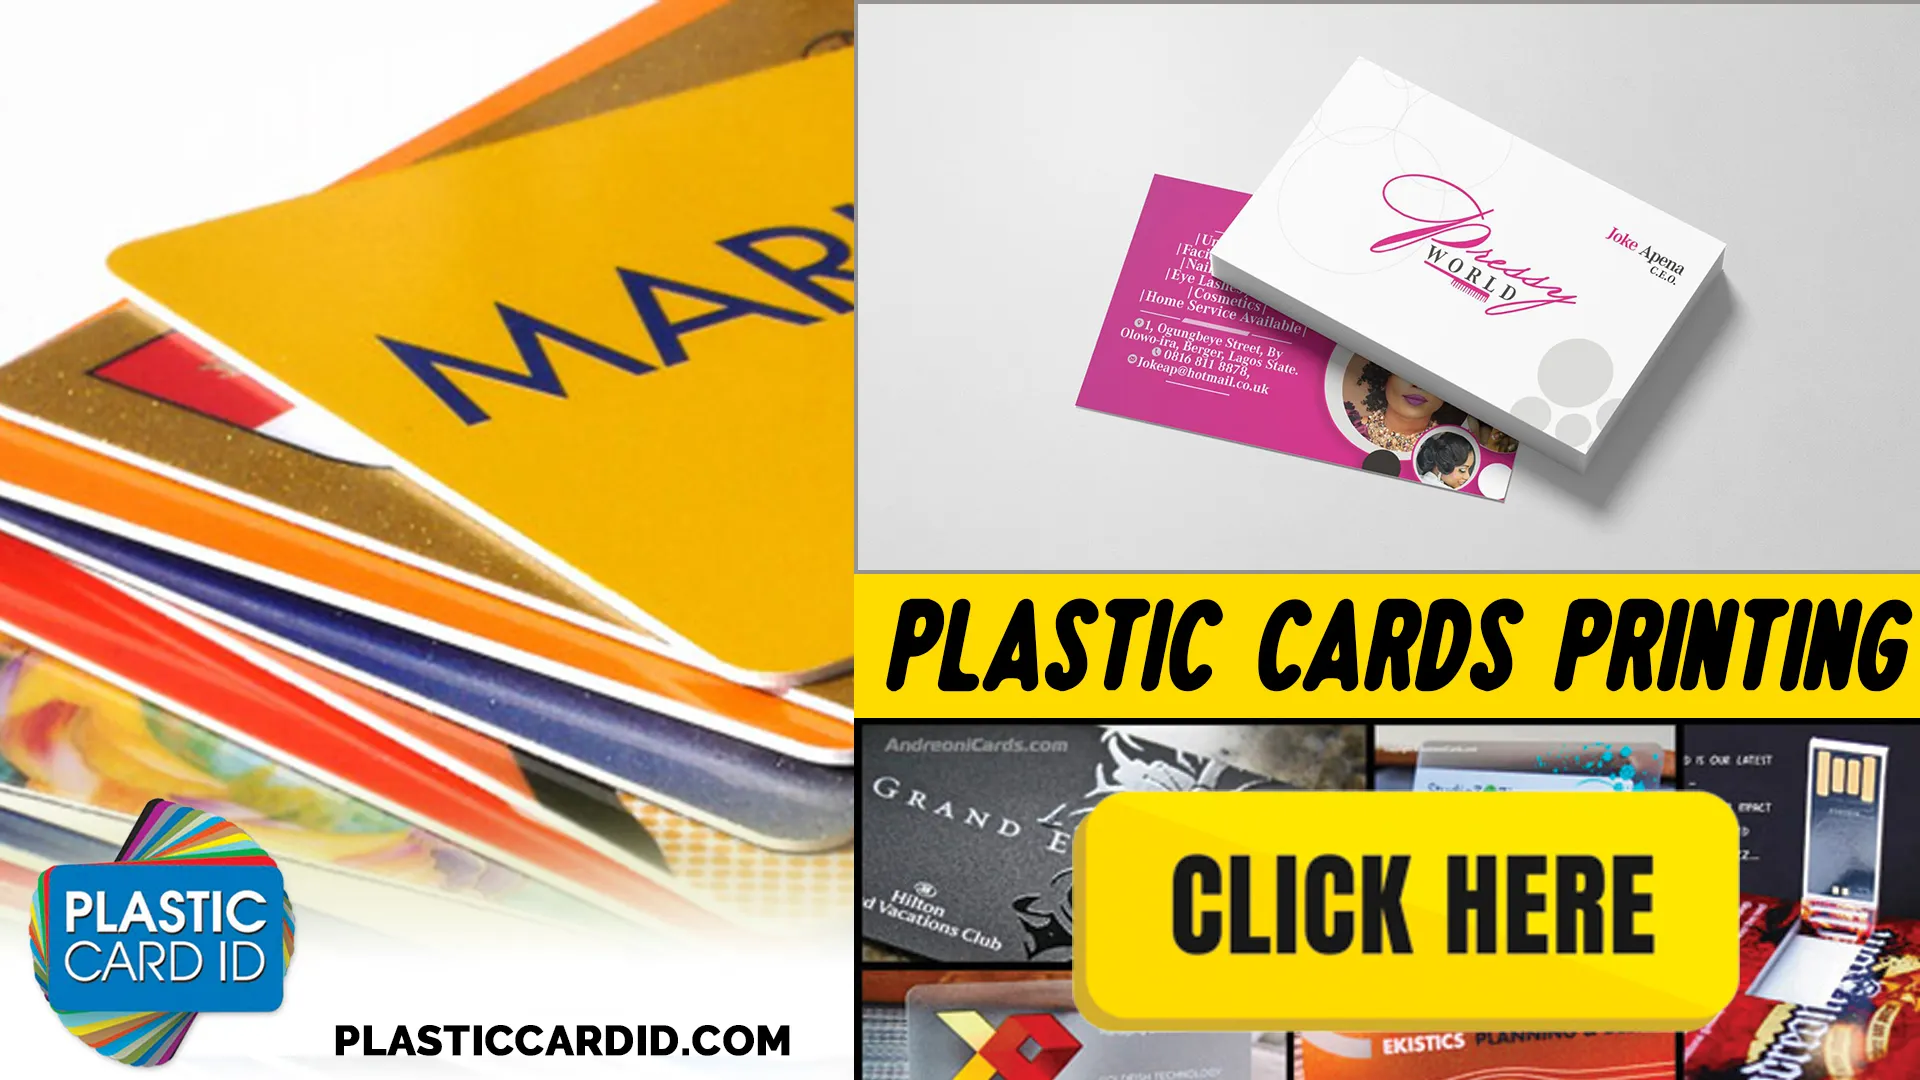 The World of Plastic Cards: More Than Just Credit Cards